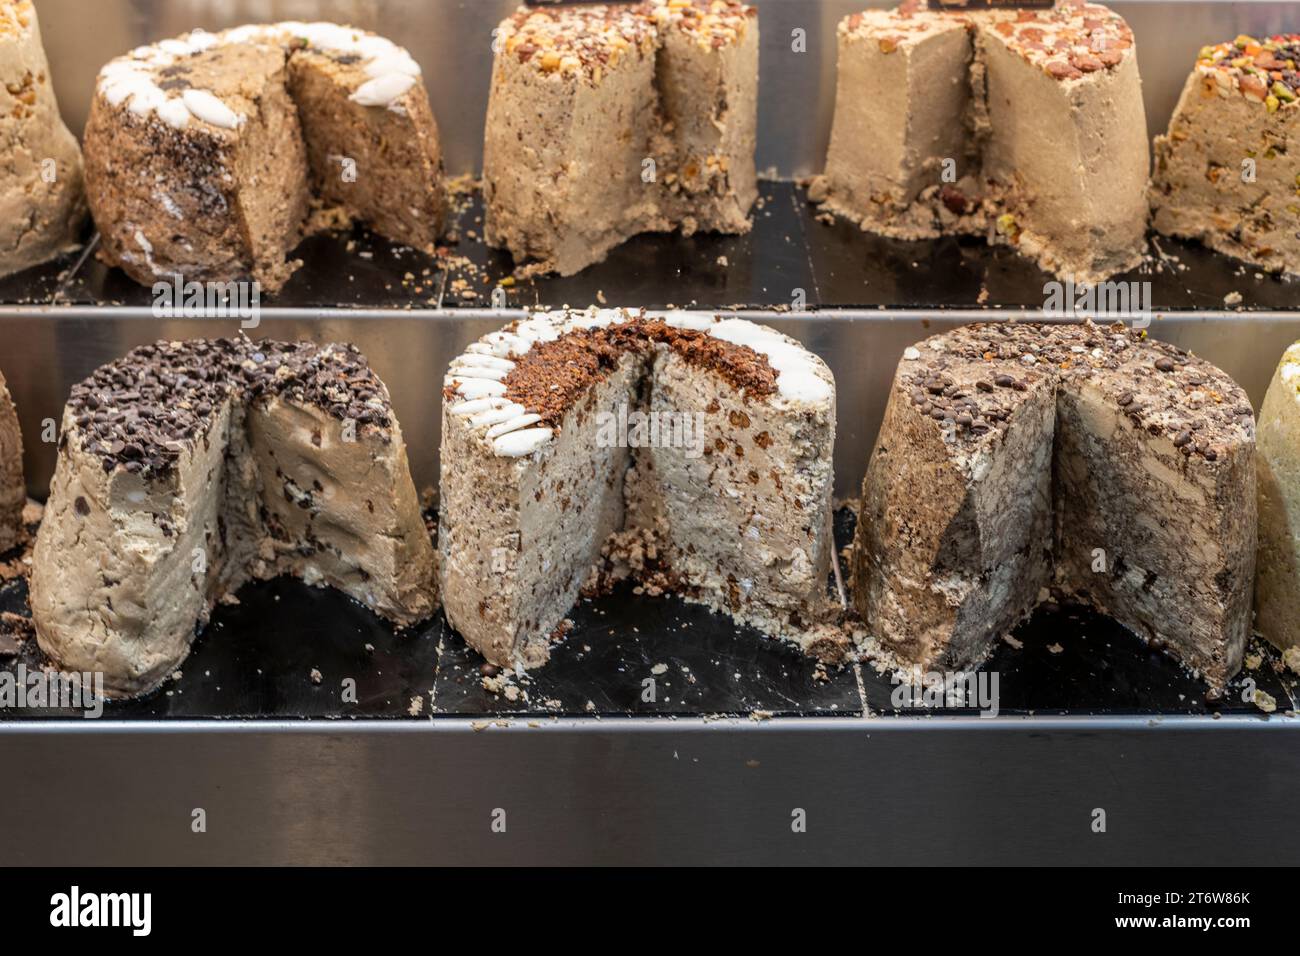 A selection of specially-flavored halva or sesame candy cakes, a Middle Eastern treat, on sale in Jerusalem's Machane Yehuda market. Stock Photo